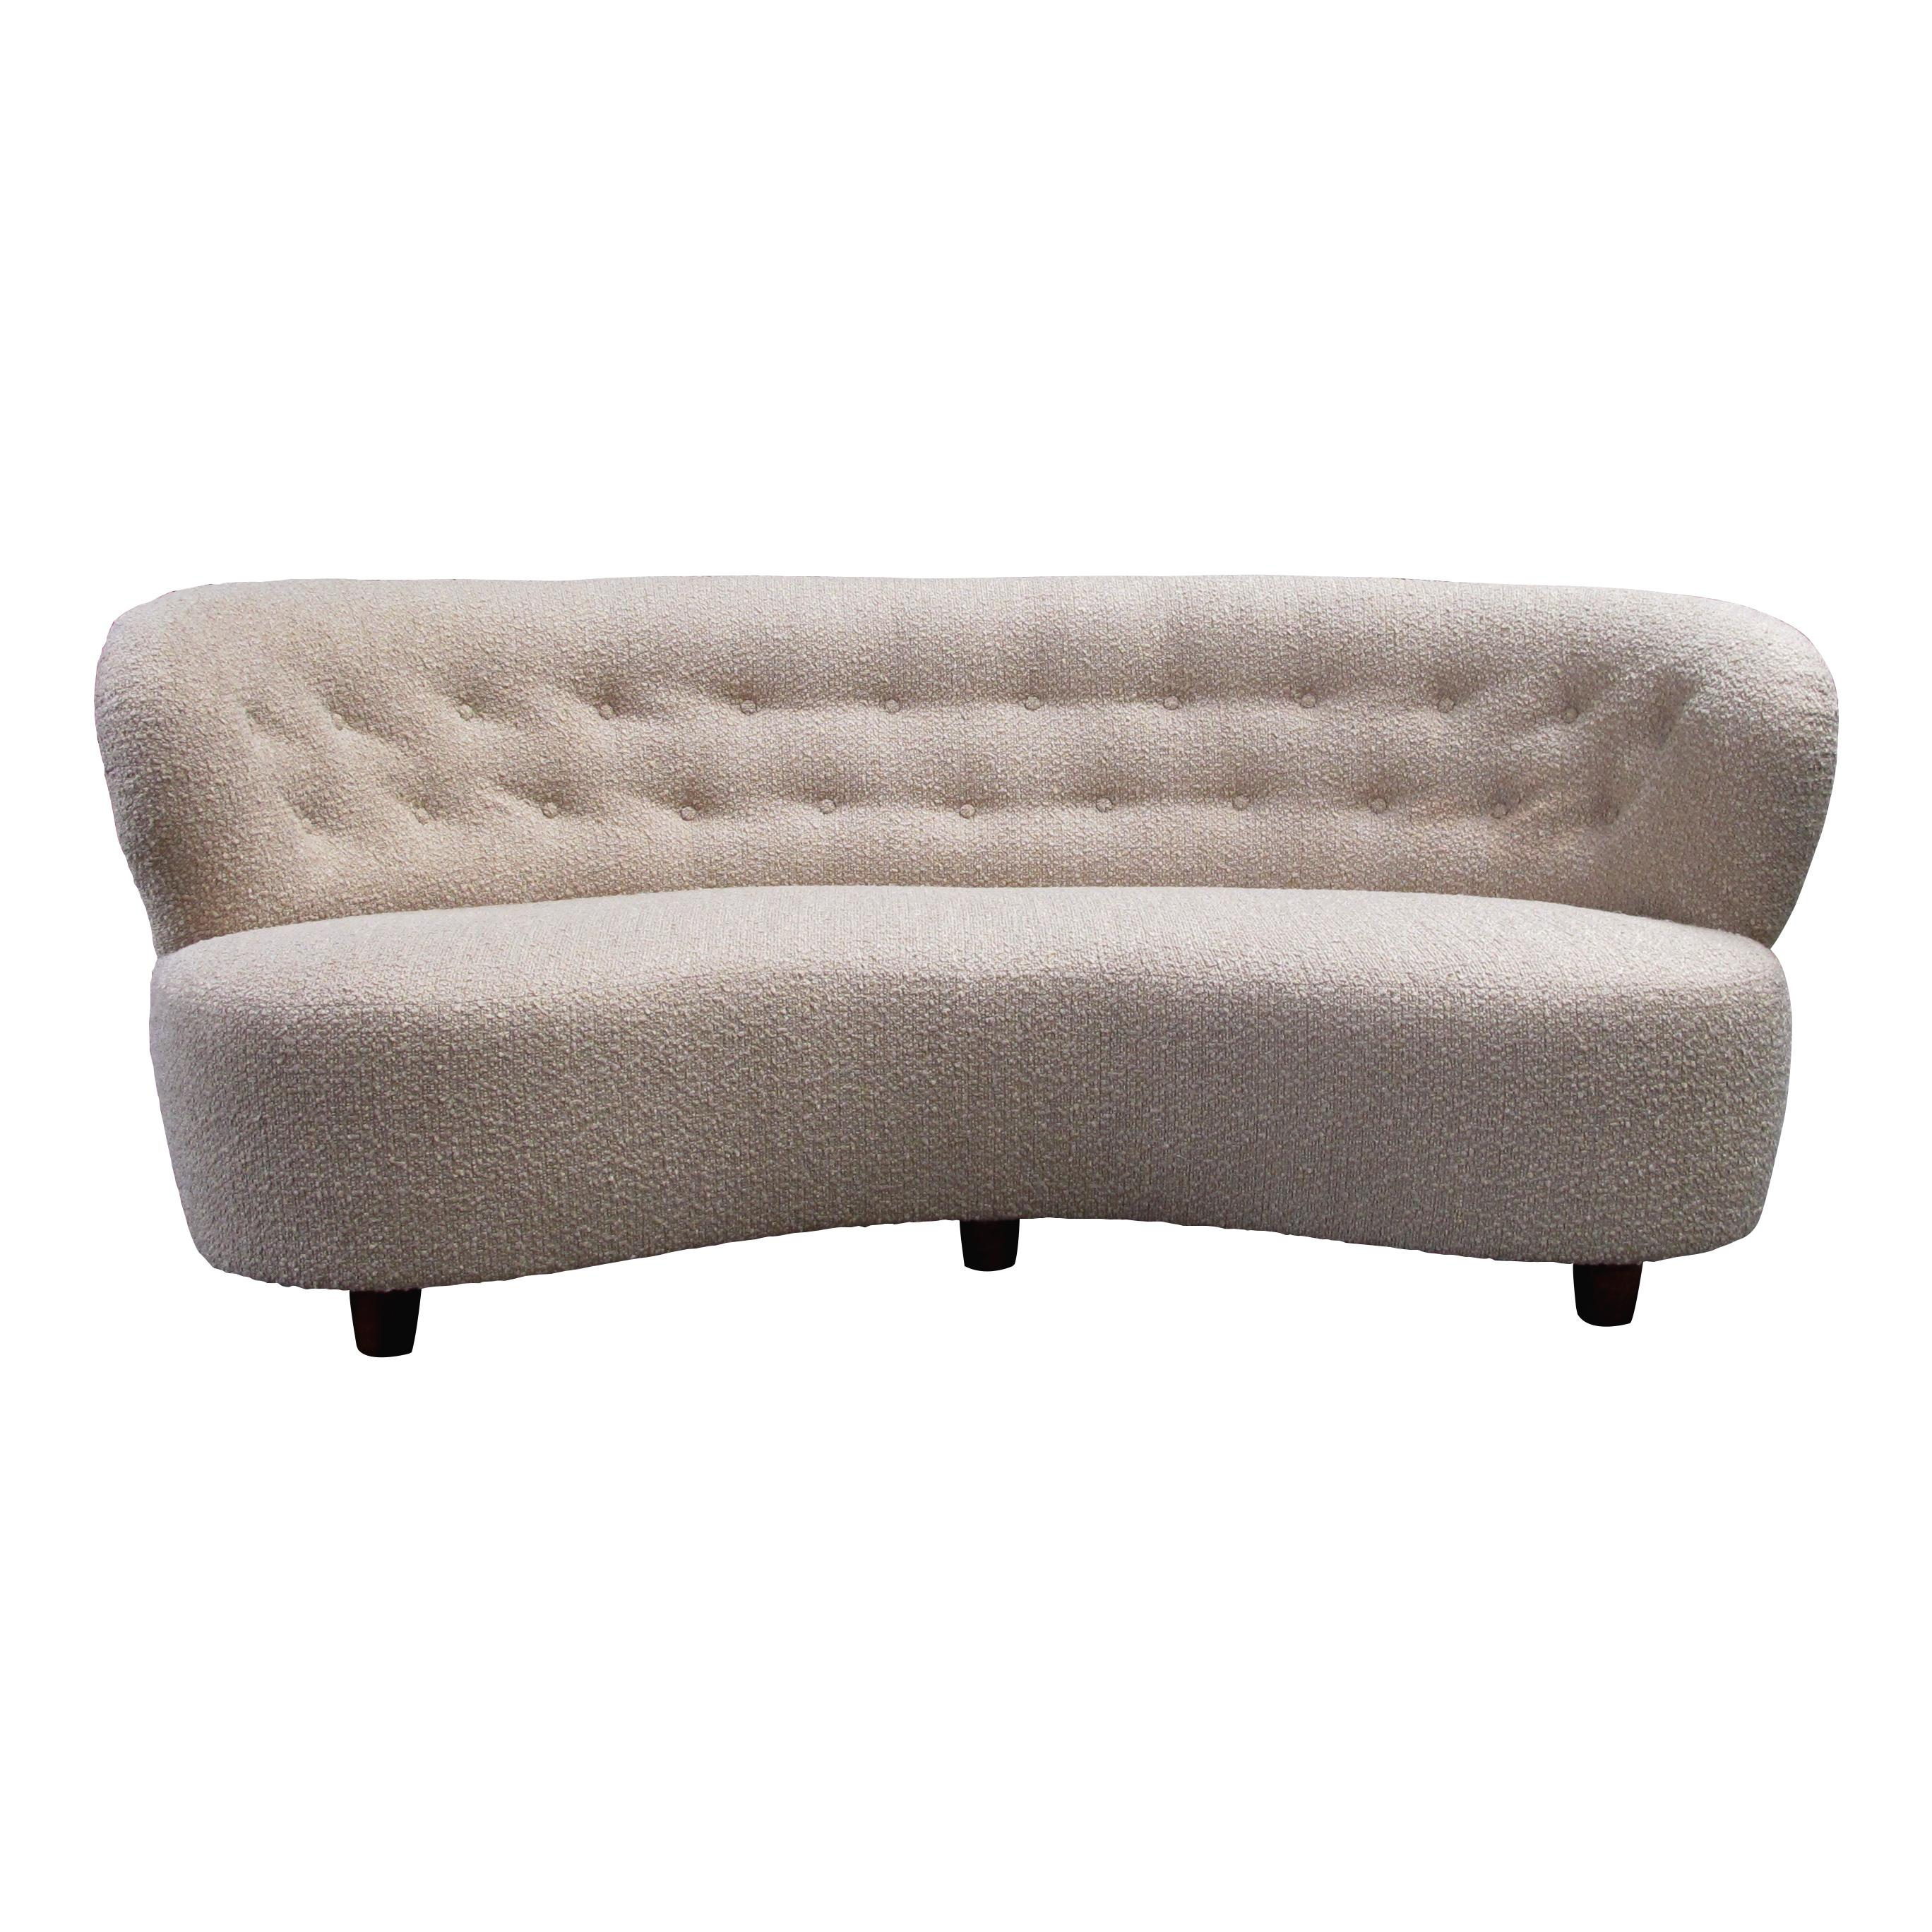 Mid-Century Modern 1940s Danish Large Curved Sofa with Buttoned Backrest Newly Upholstered  For Sale